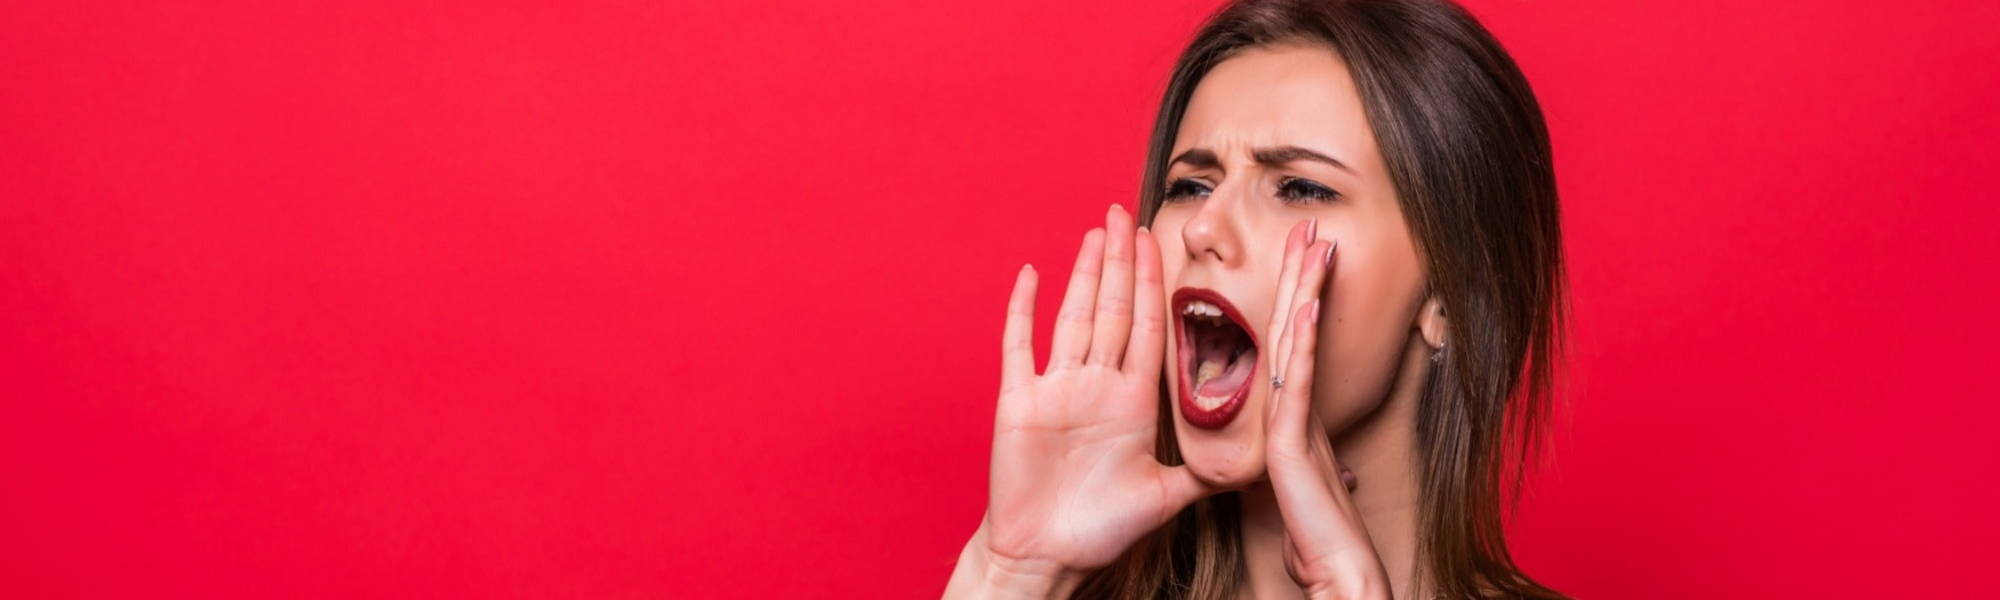 Lady against red wall holding hand up to mouth and shouting 